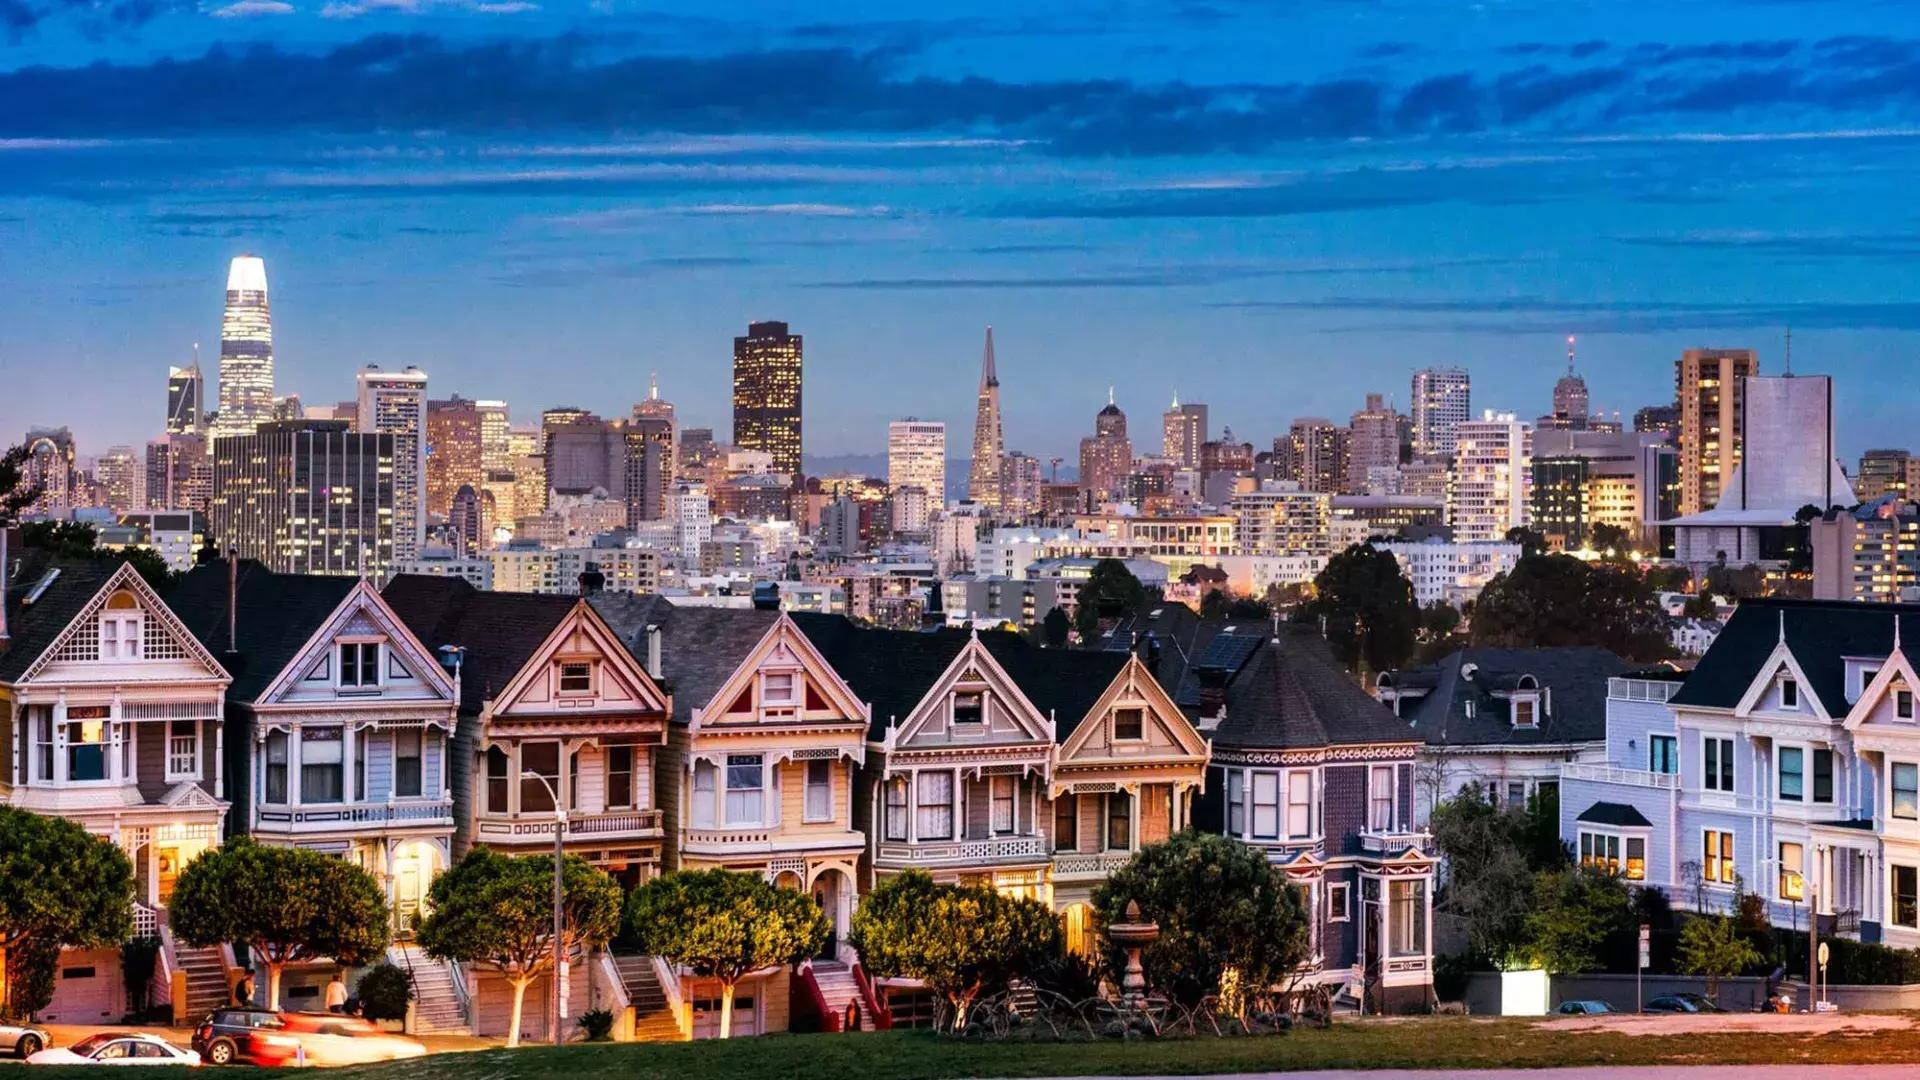 The famous 涂女士 of Alamo Square are pictured before the 贝博体彩app skyline at twilight.